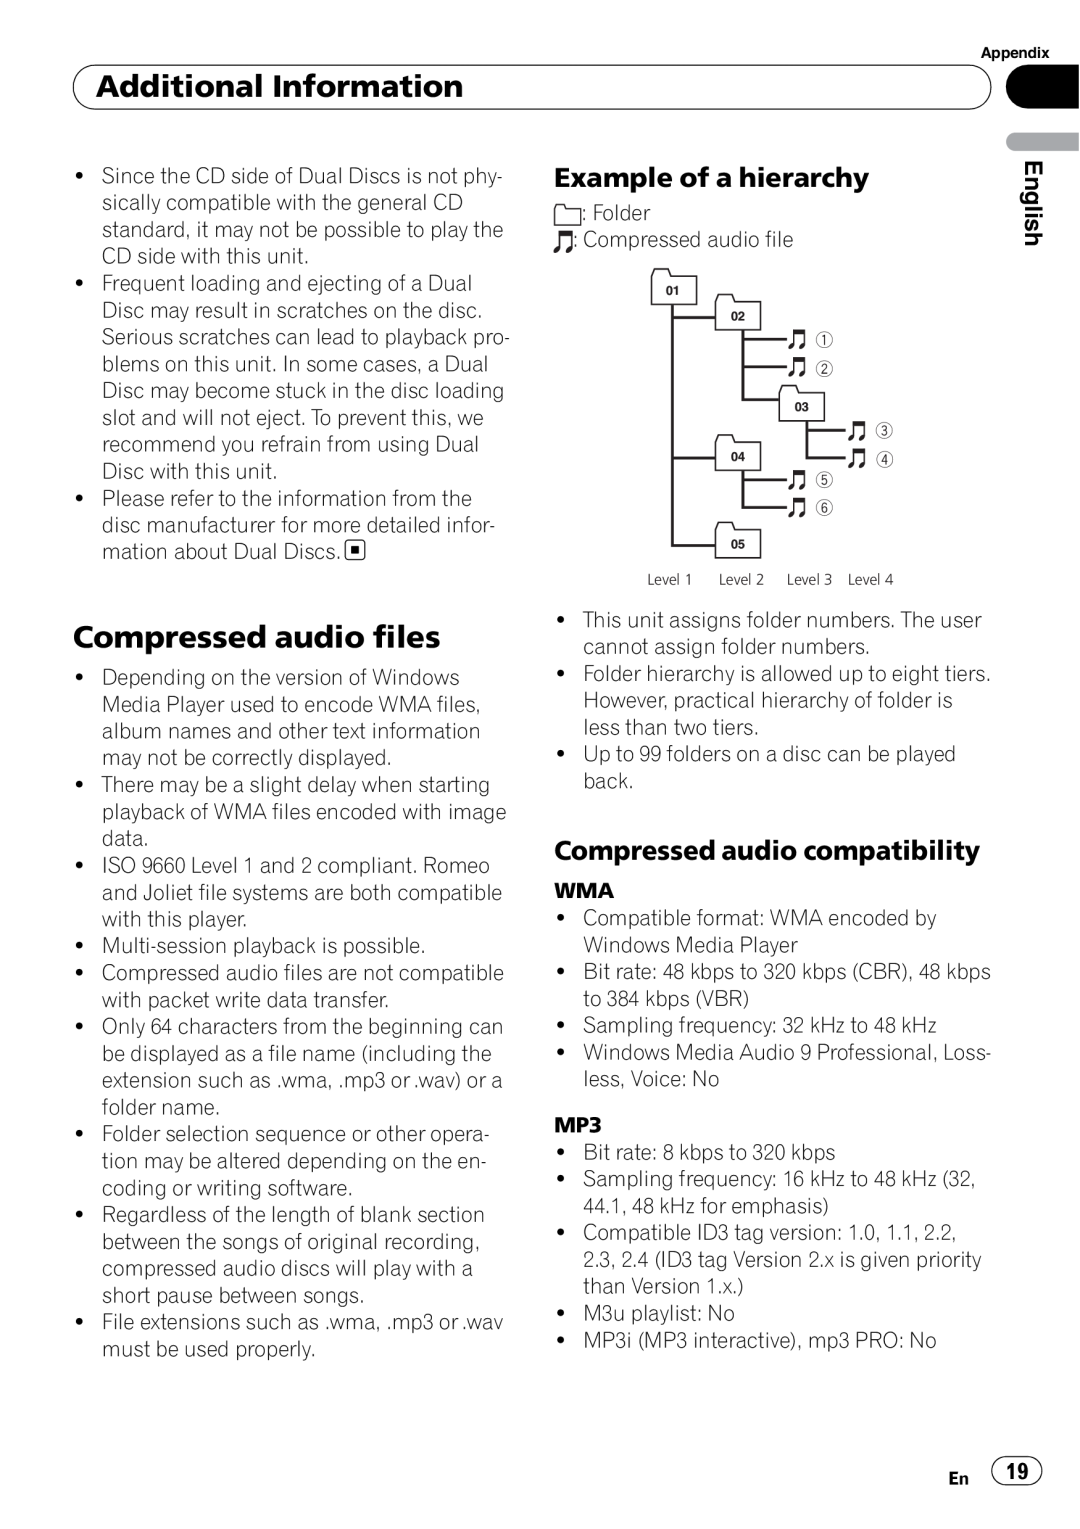 Pioneer DEH-200MP Compressed audio files, Example of a hierarchy, Compressed audio compatibility, Additional Information 